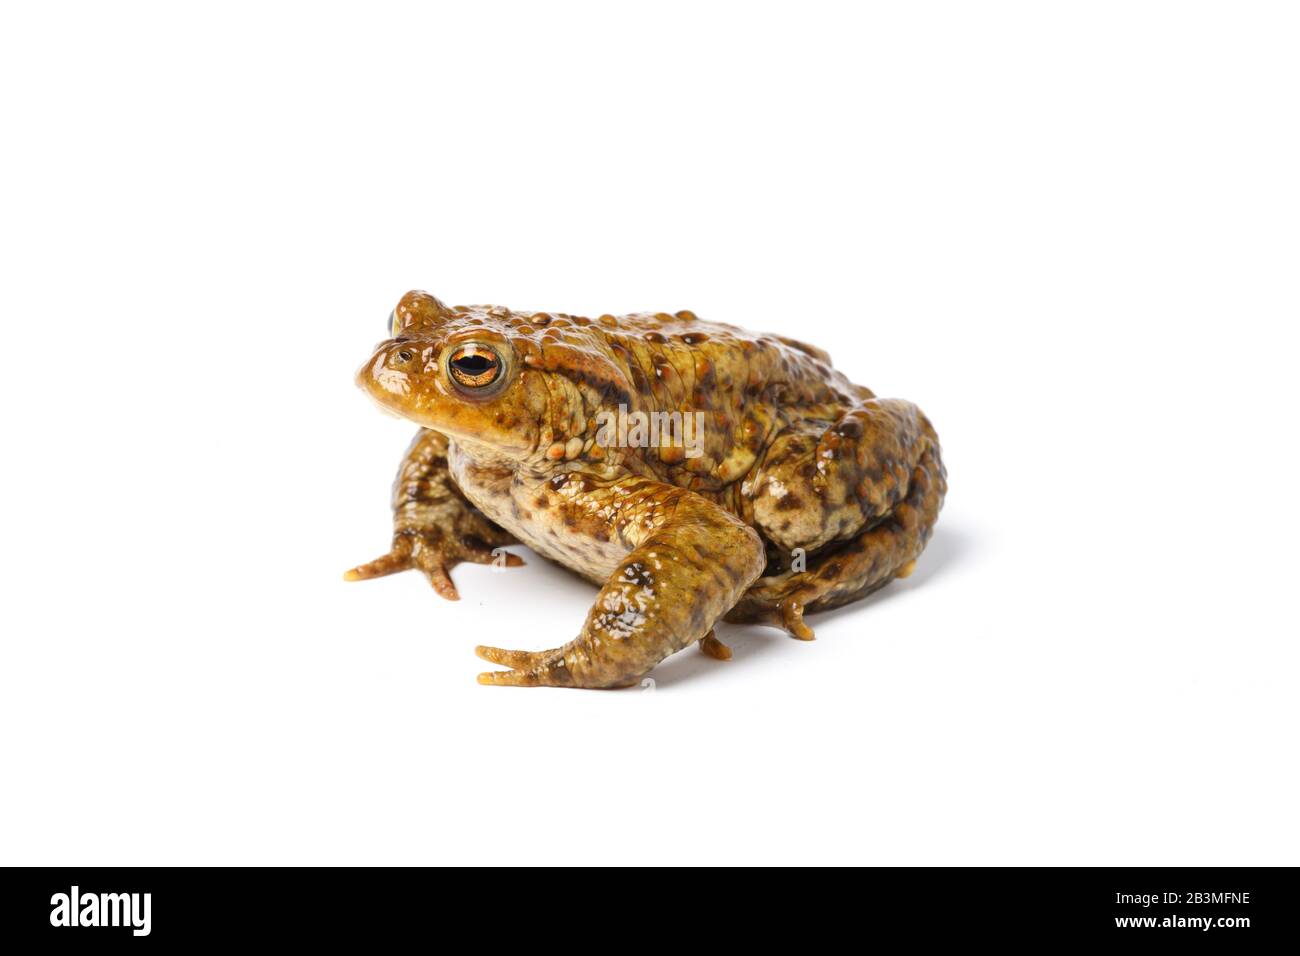 European Common Toad, Bufo bufo, on a white background. Gwent, Wales, UK Stock Photo